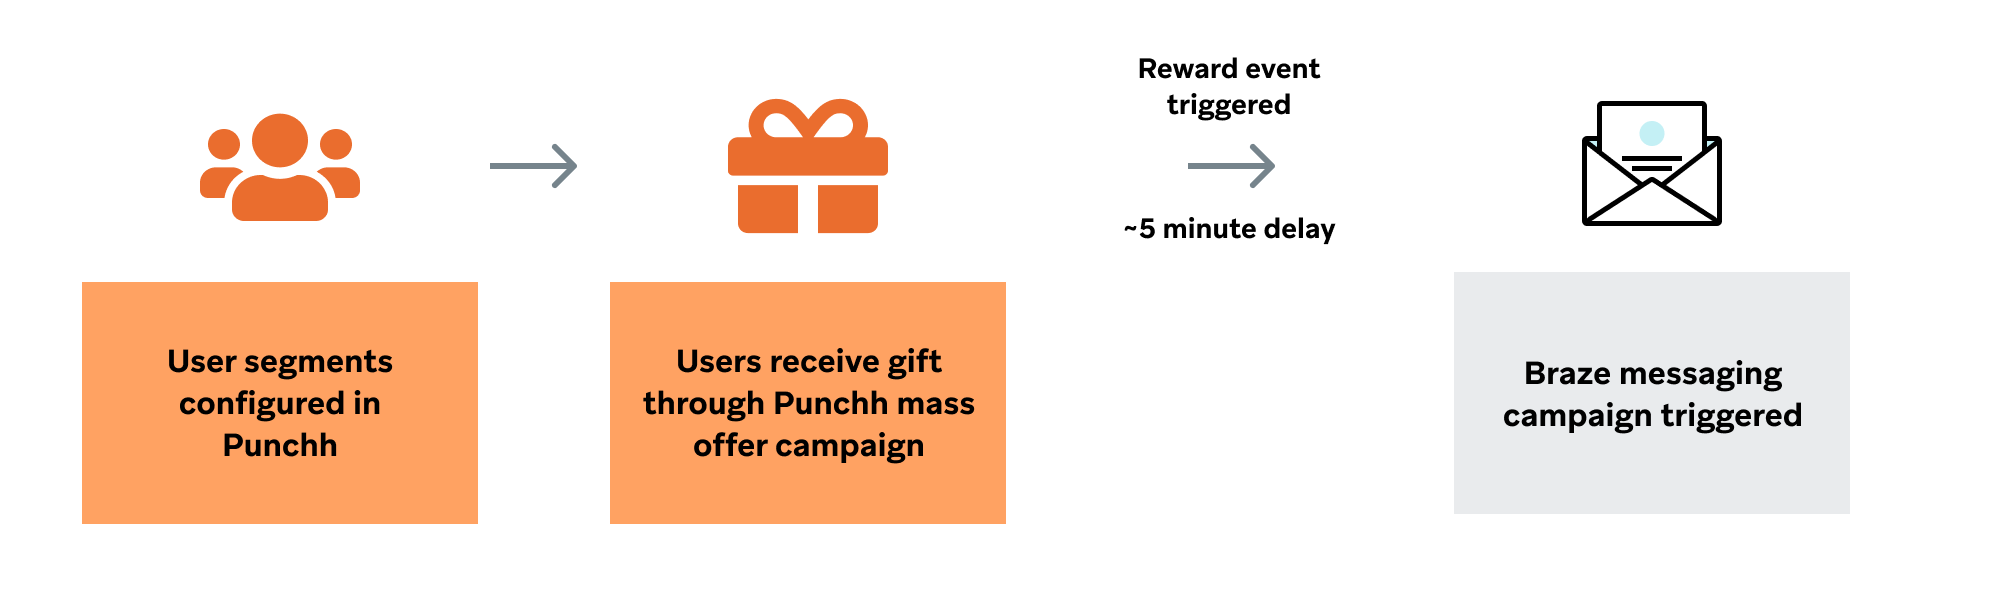 A user segment can be configured in Punchh, and users receive a gift through a Punchh mass offer campaign. Next, a reward event is triggered, and then the Braze messaging campaign is triggered.